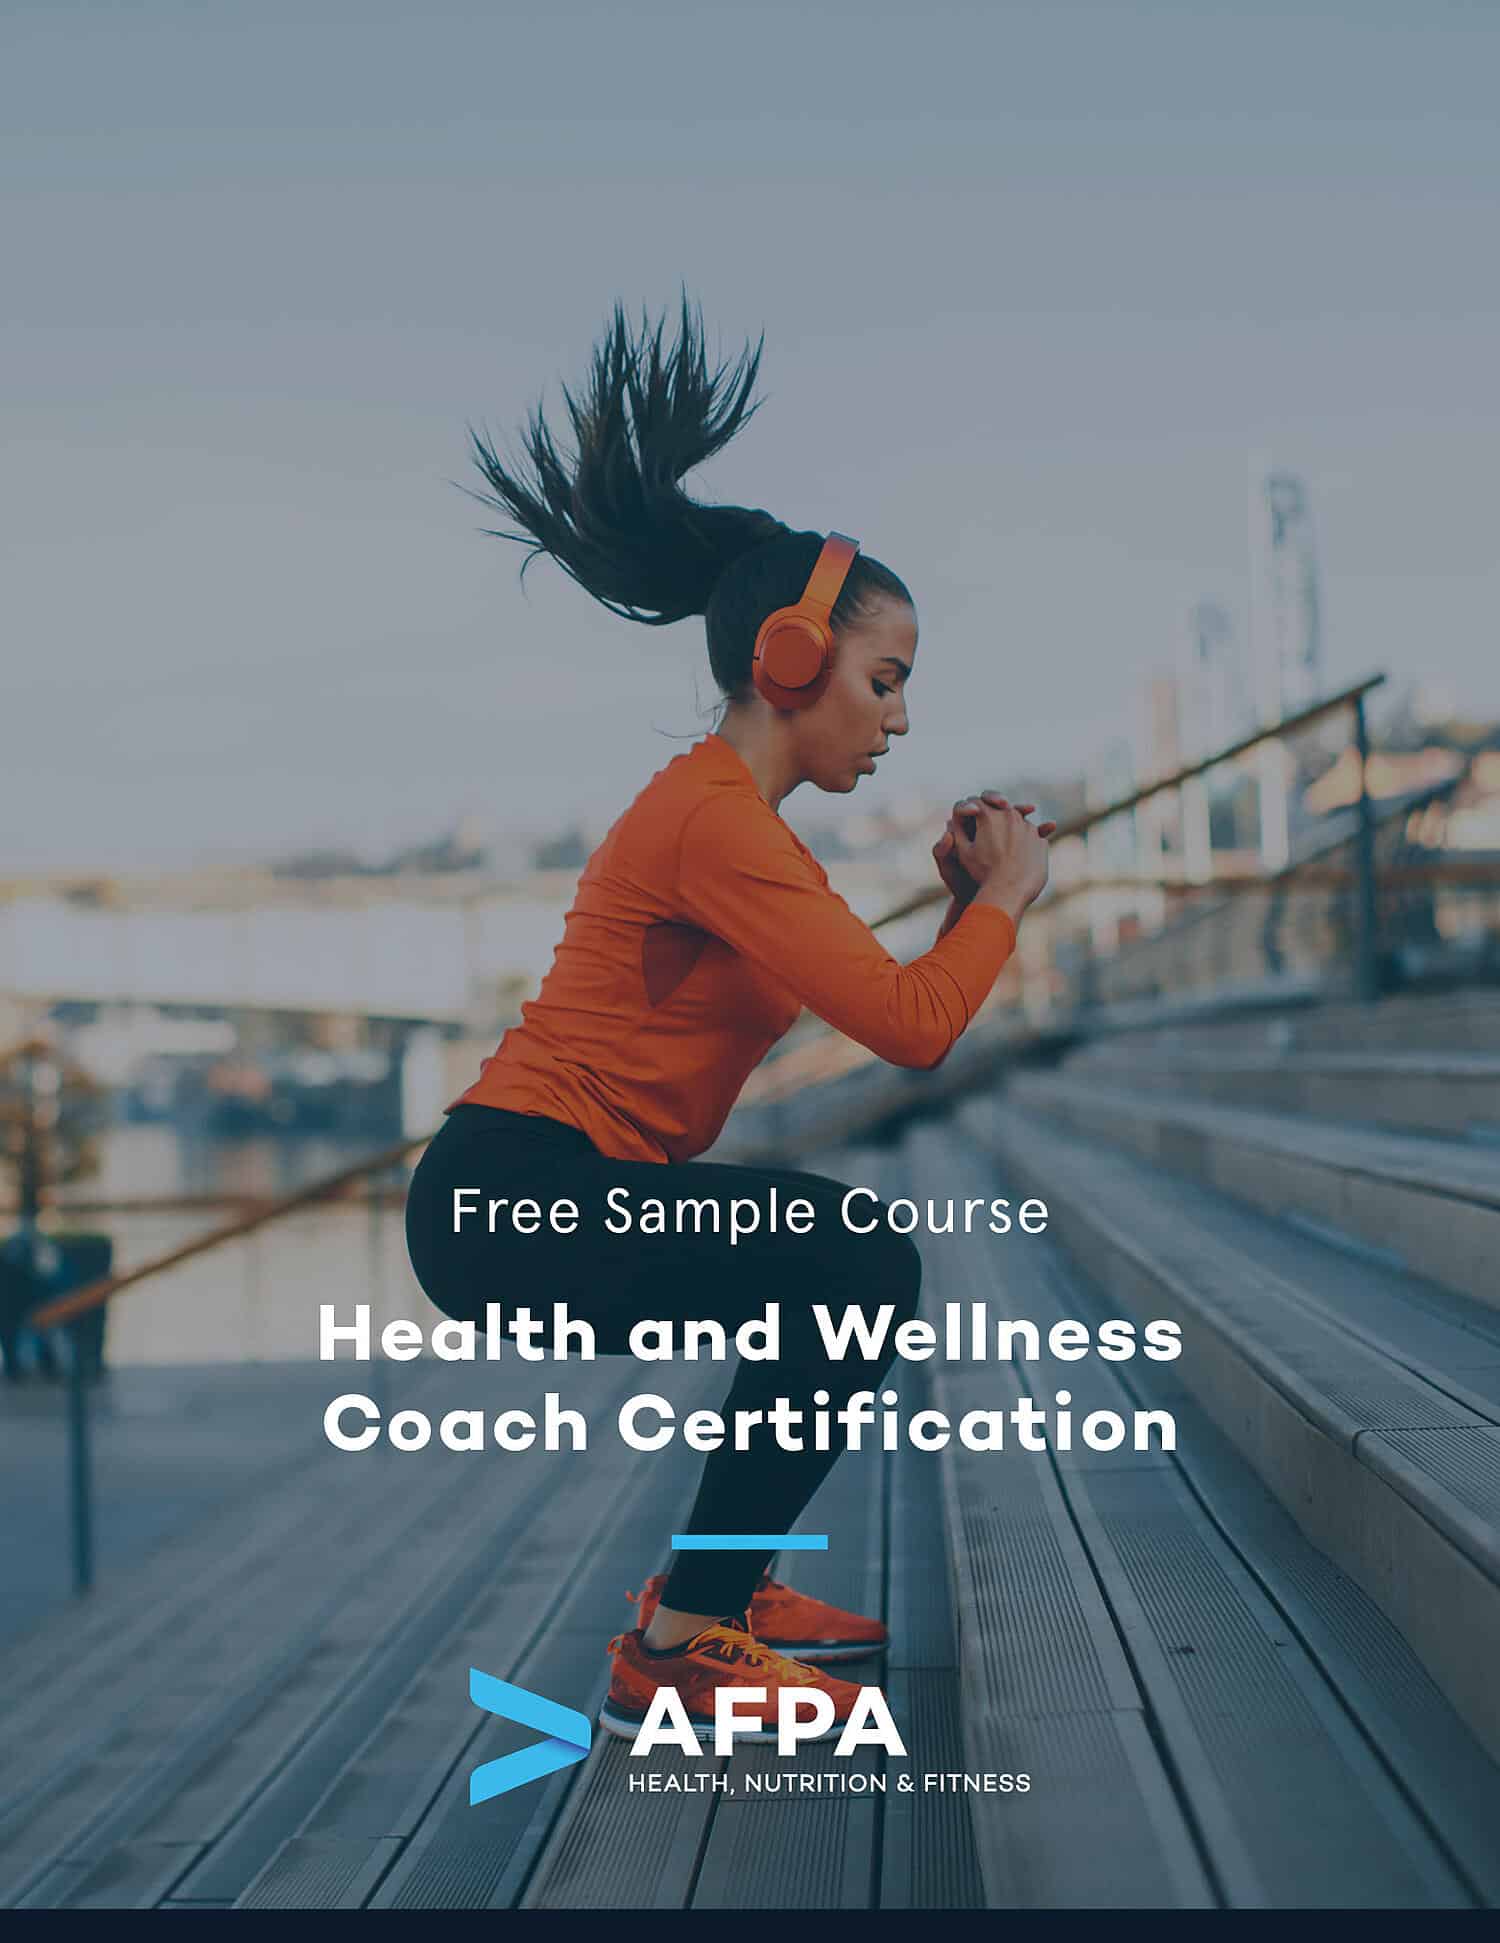 https://www.afpafitness.com/wp-content/uploads/2022/07/AFPA-Health-and-Wellness-Coach-Sample-Course-2019.jpeg